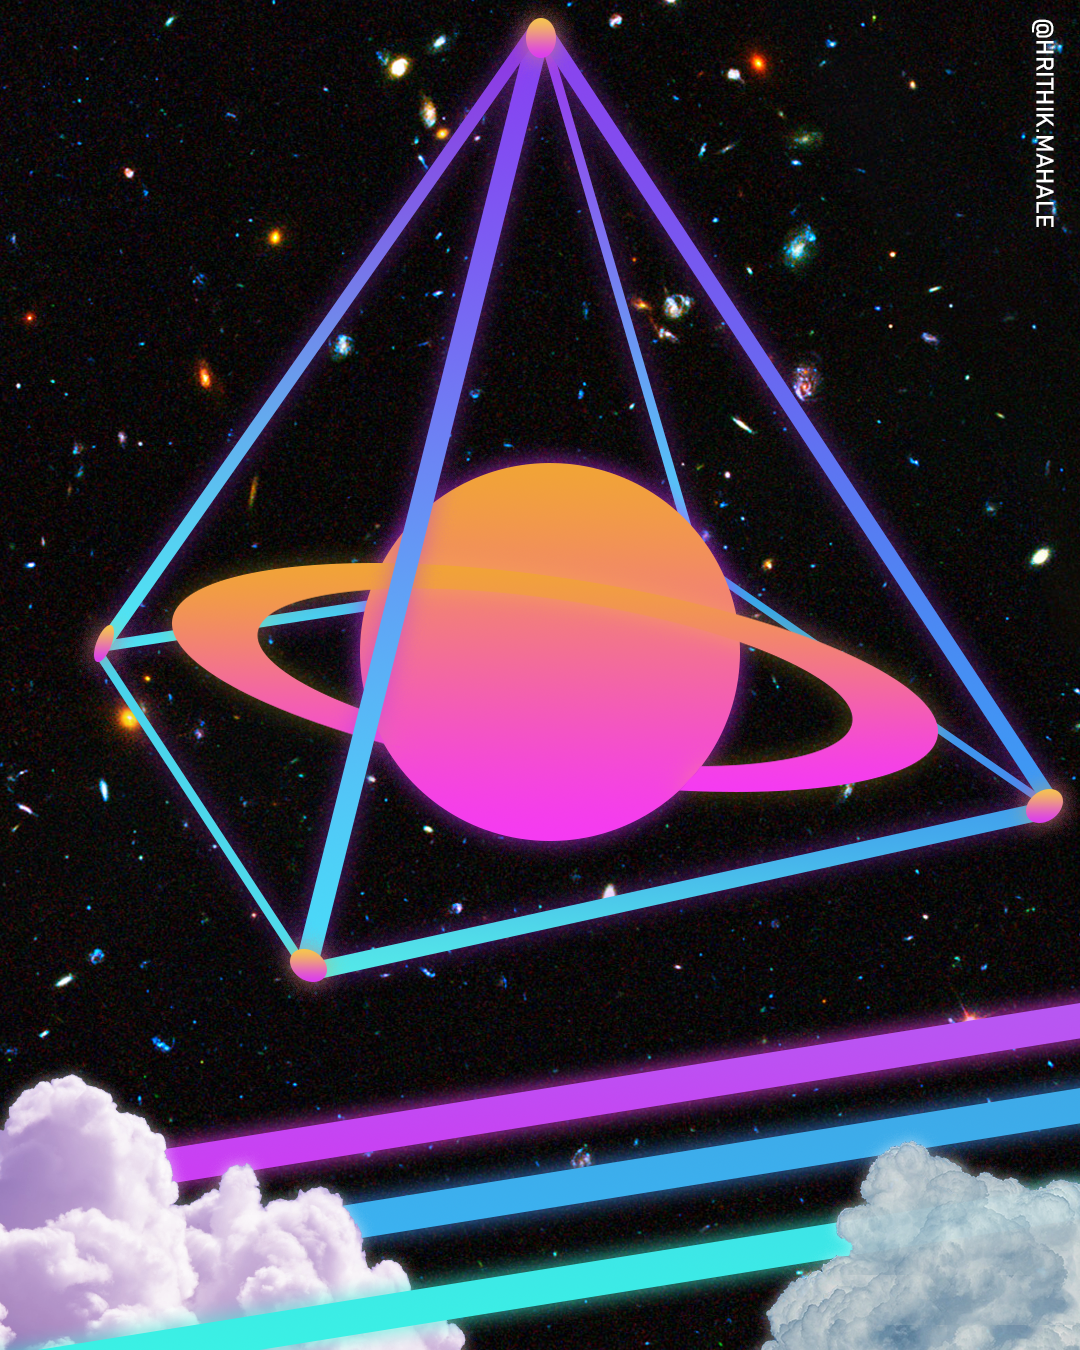 Saturn Planet Clouds Prism Lights Triangle Galaxy Noise Pyramid 1080x1350